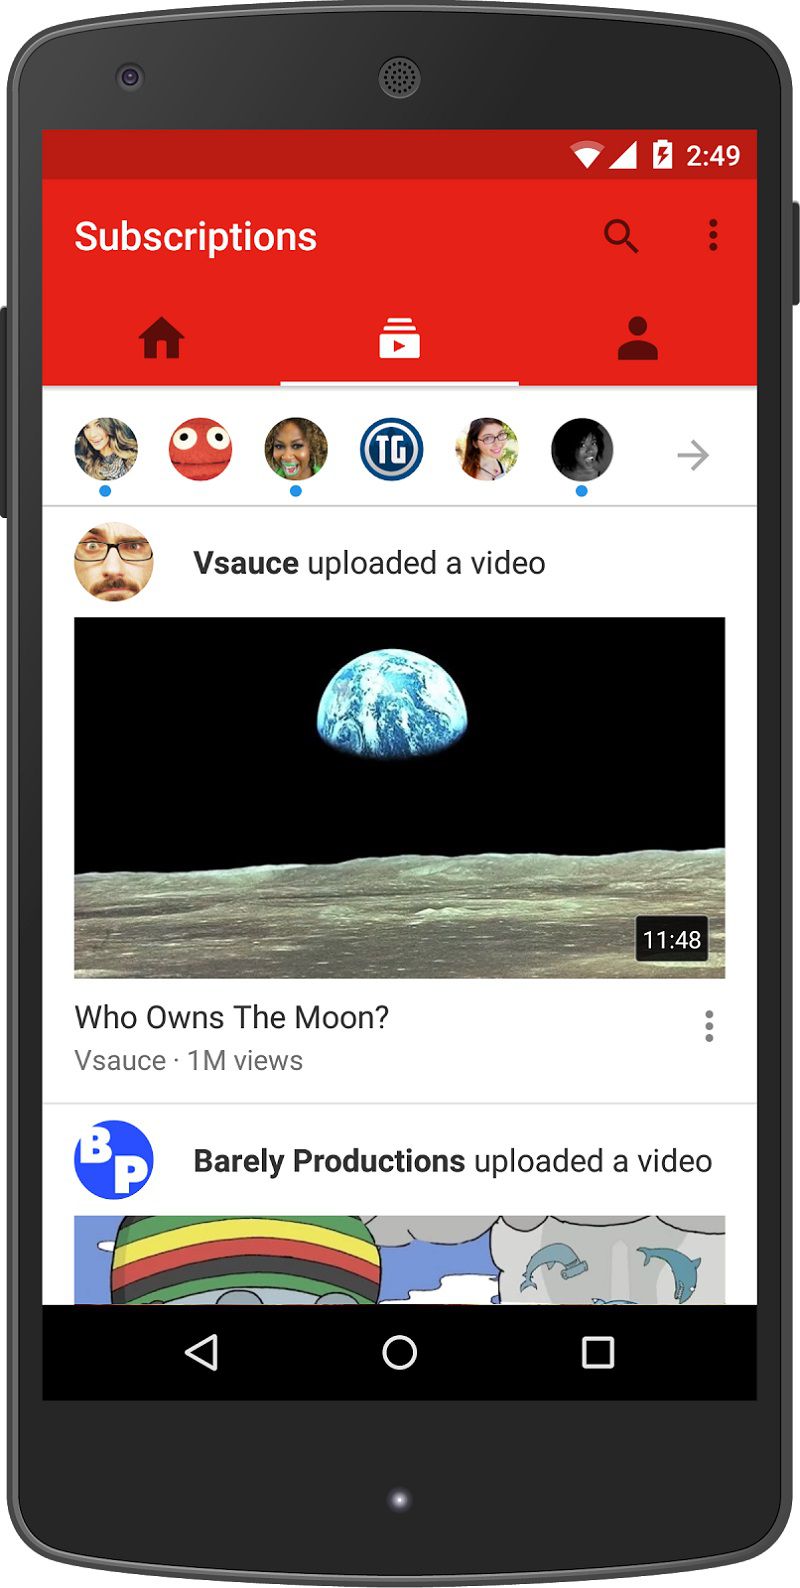 YouTube-Mobile-App-Update-Subscriptions-2